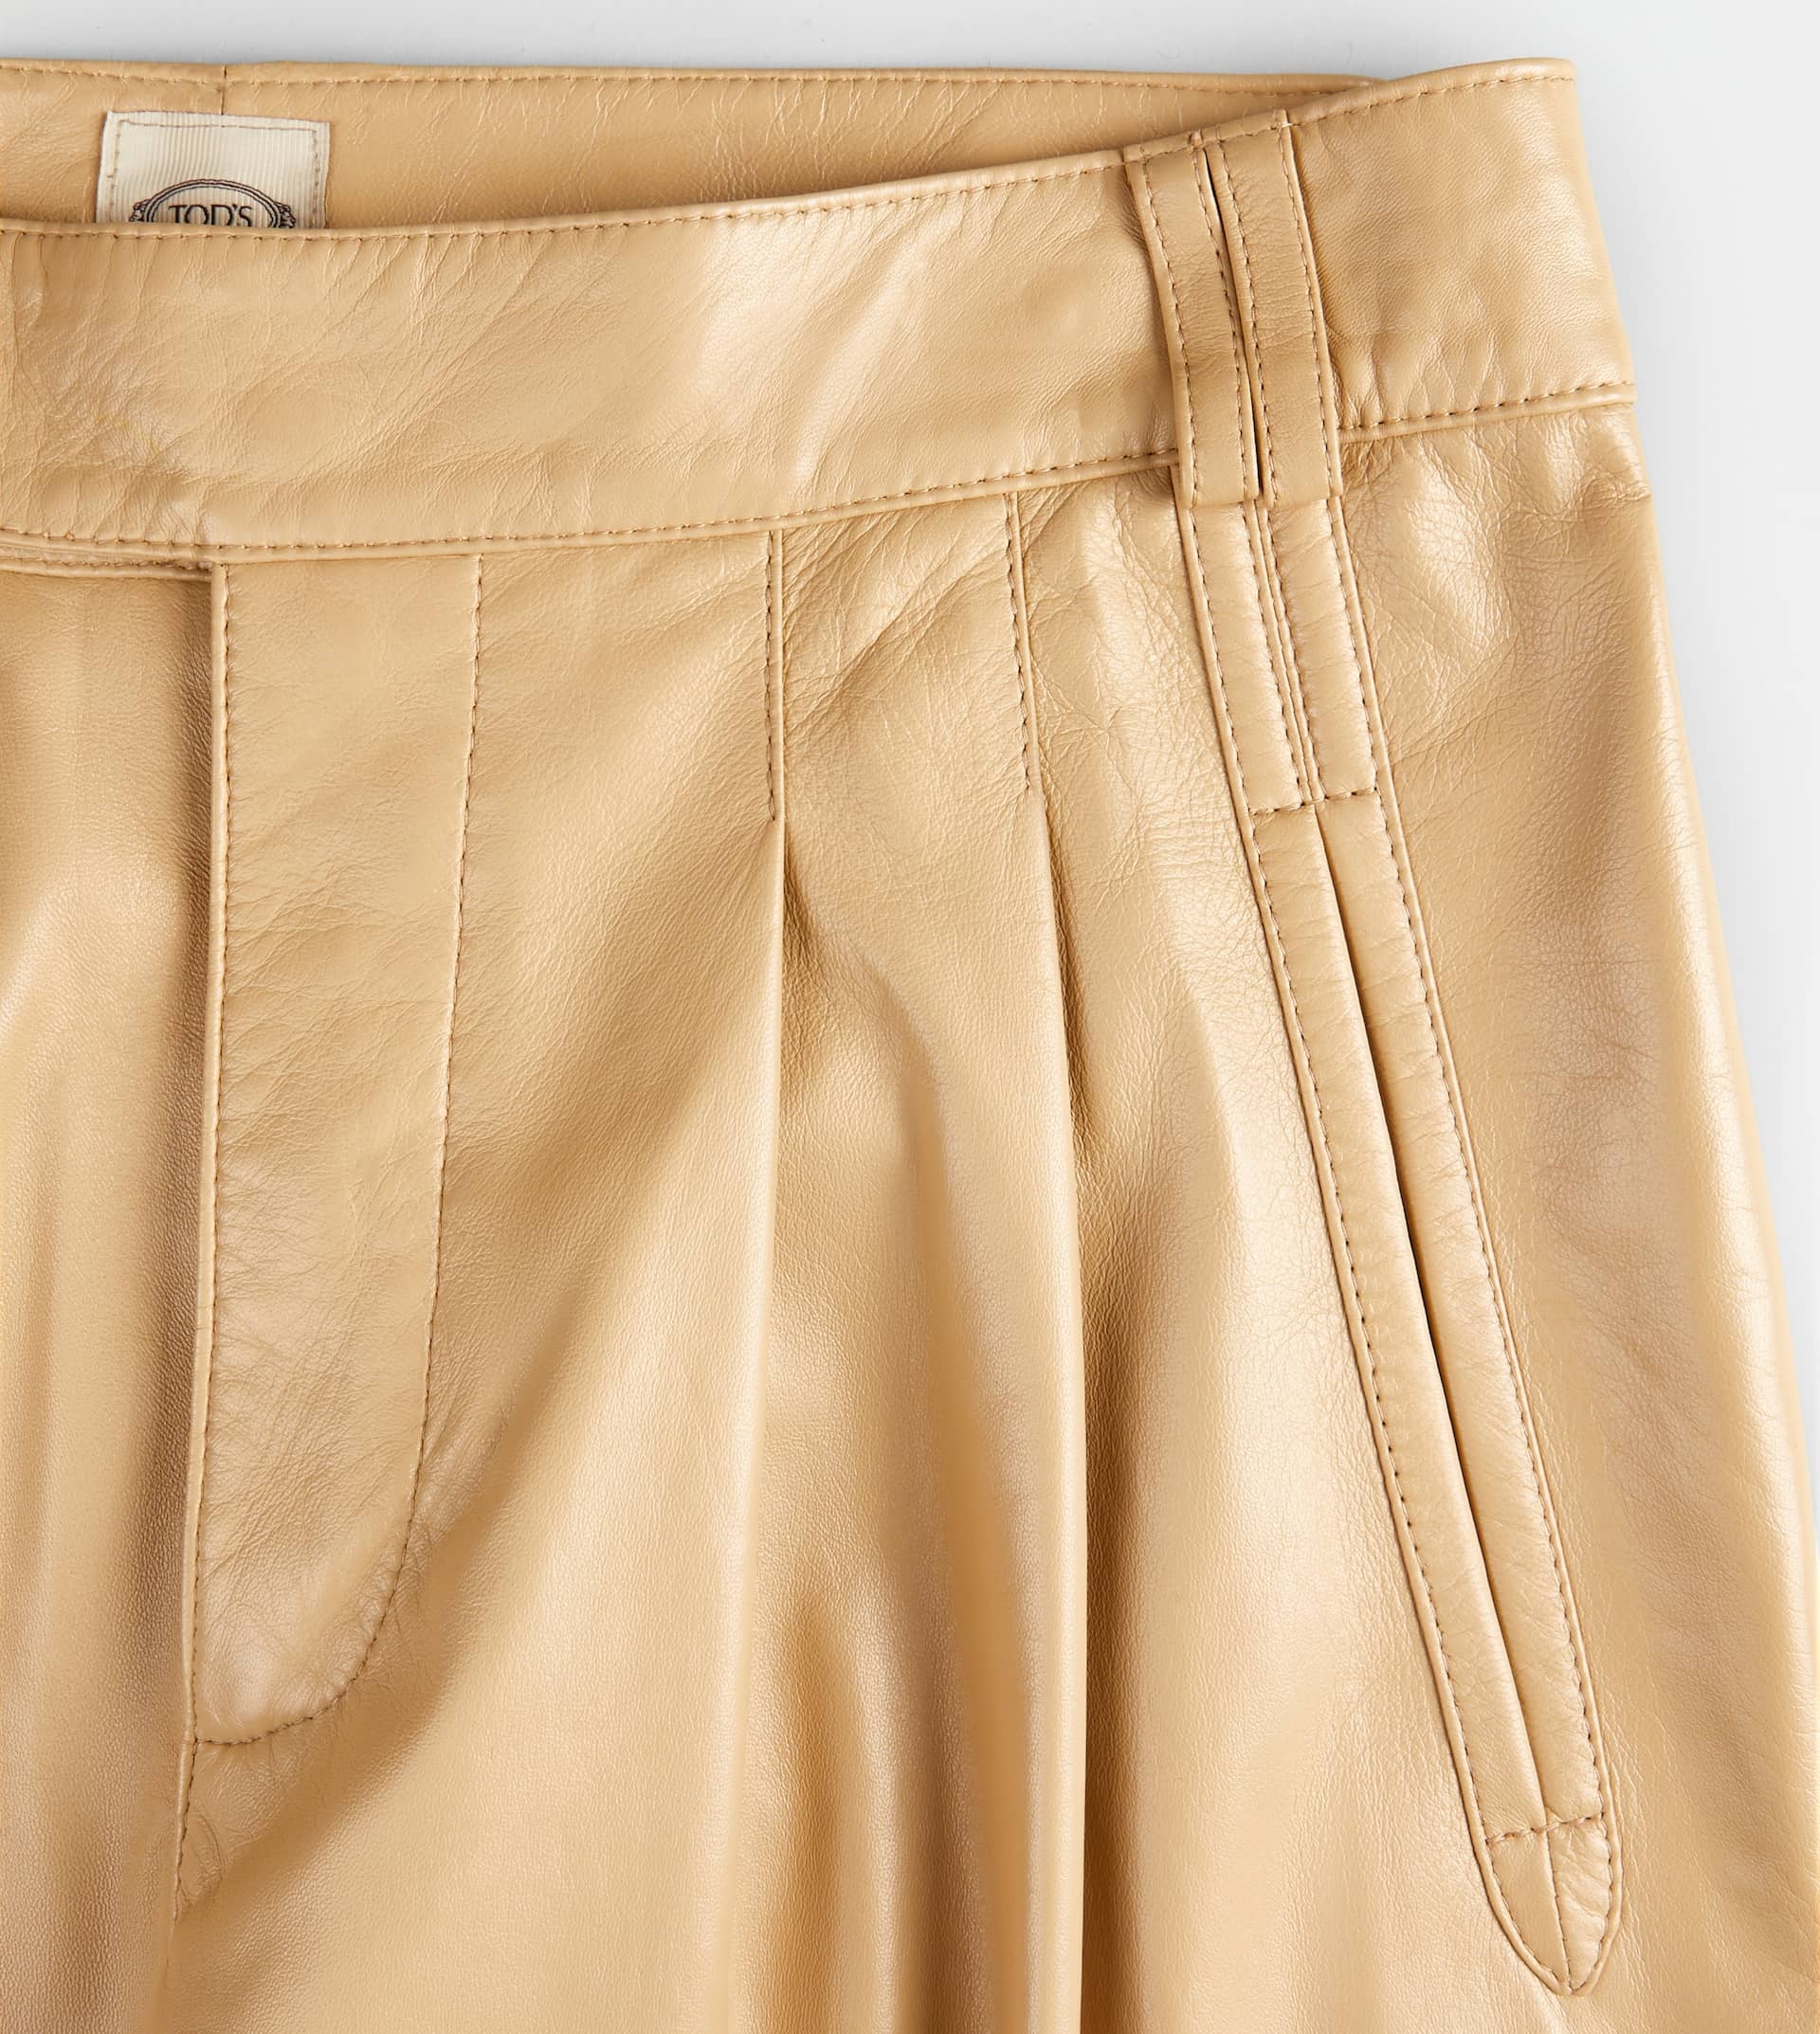 PANTS IN LEATHER - BEIGE - 9